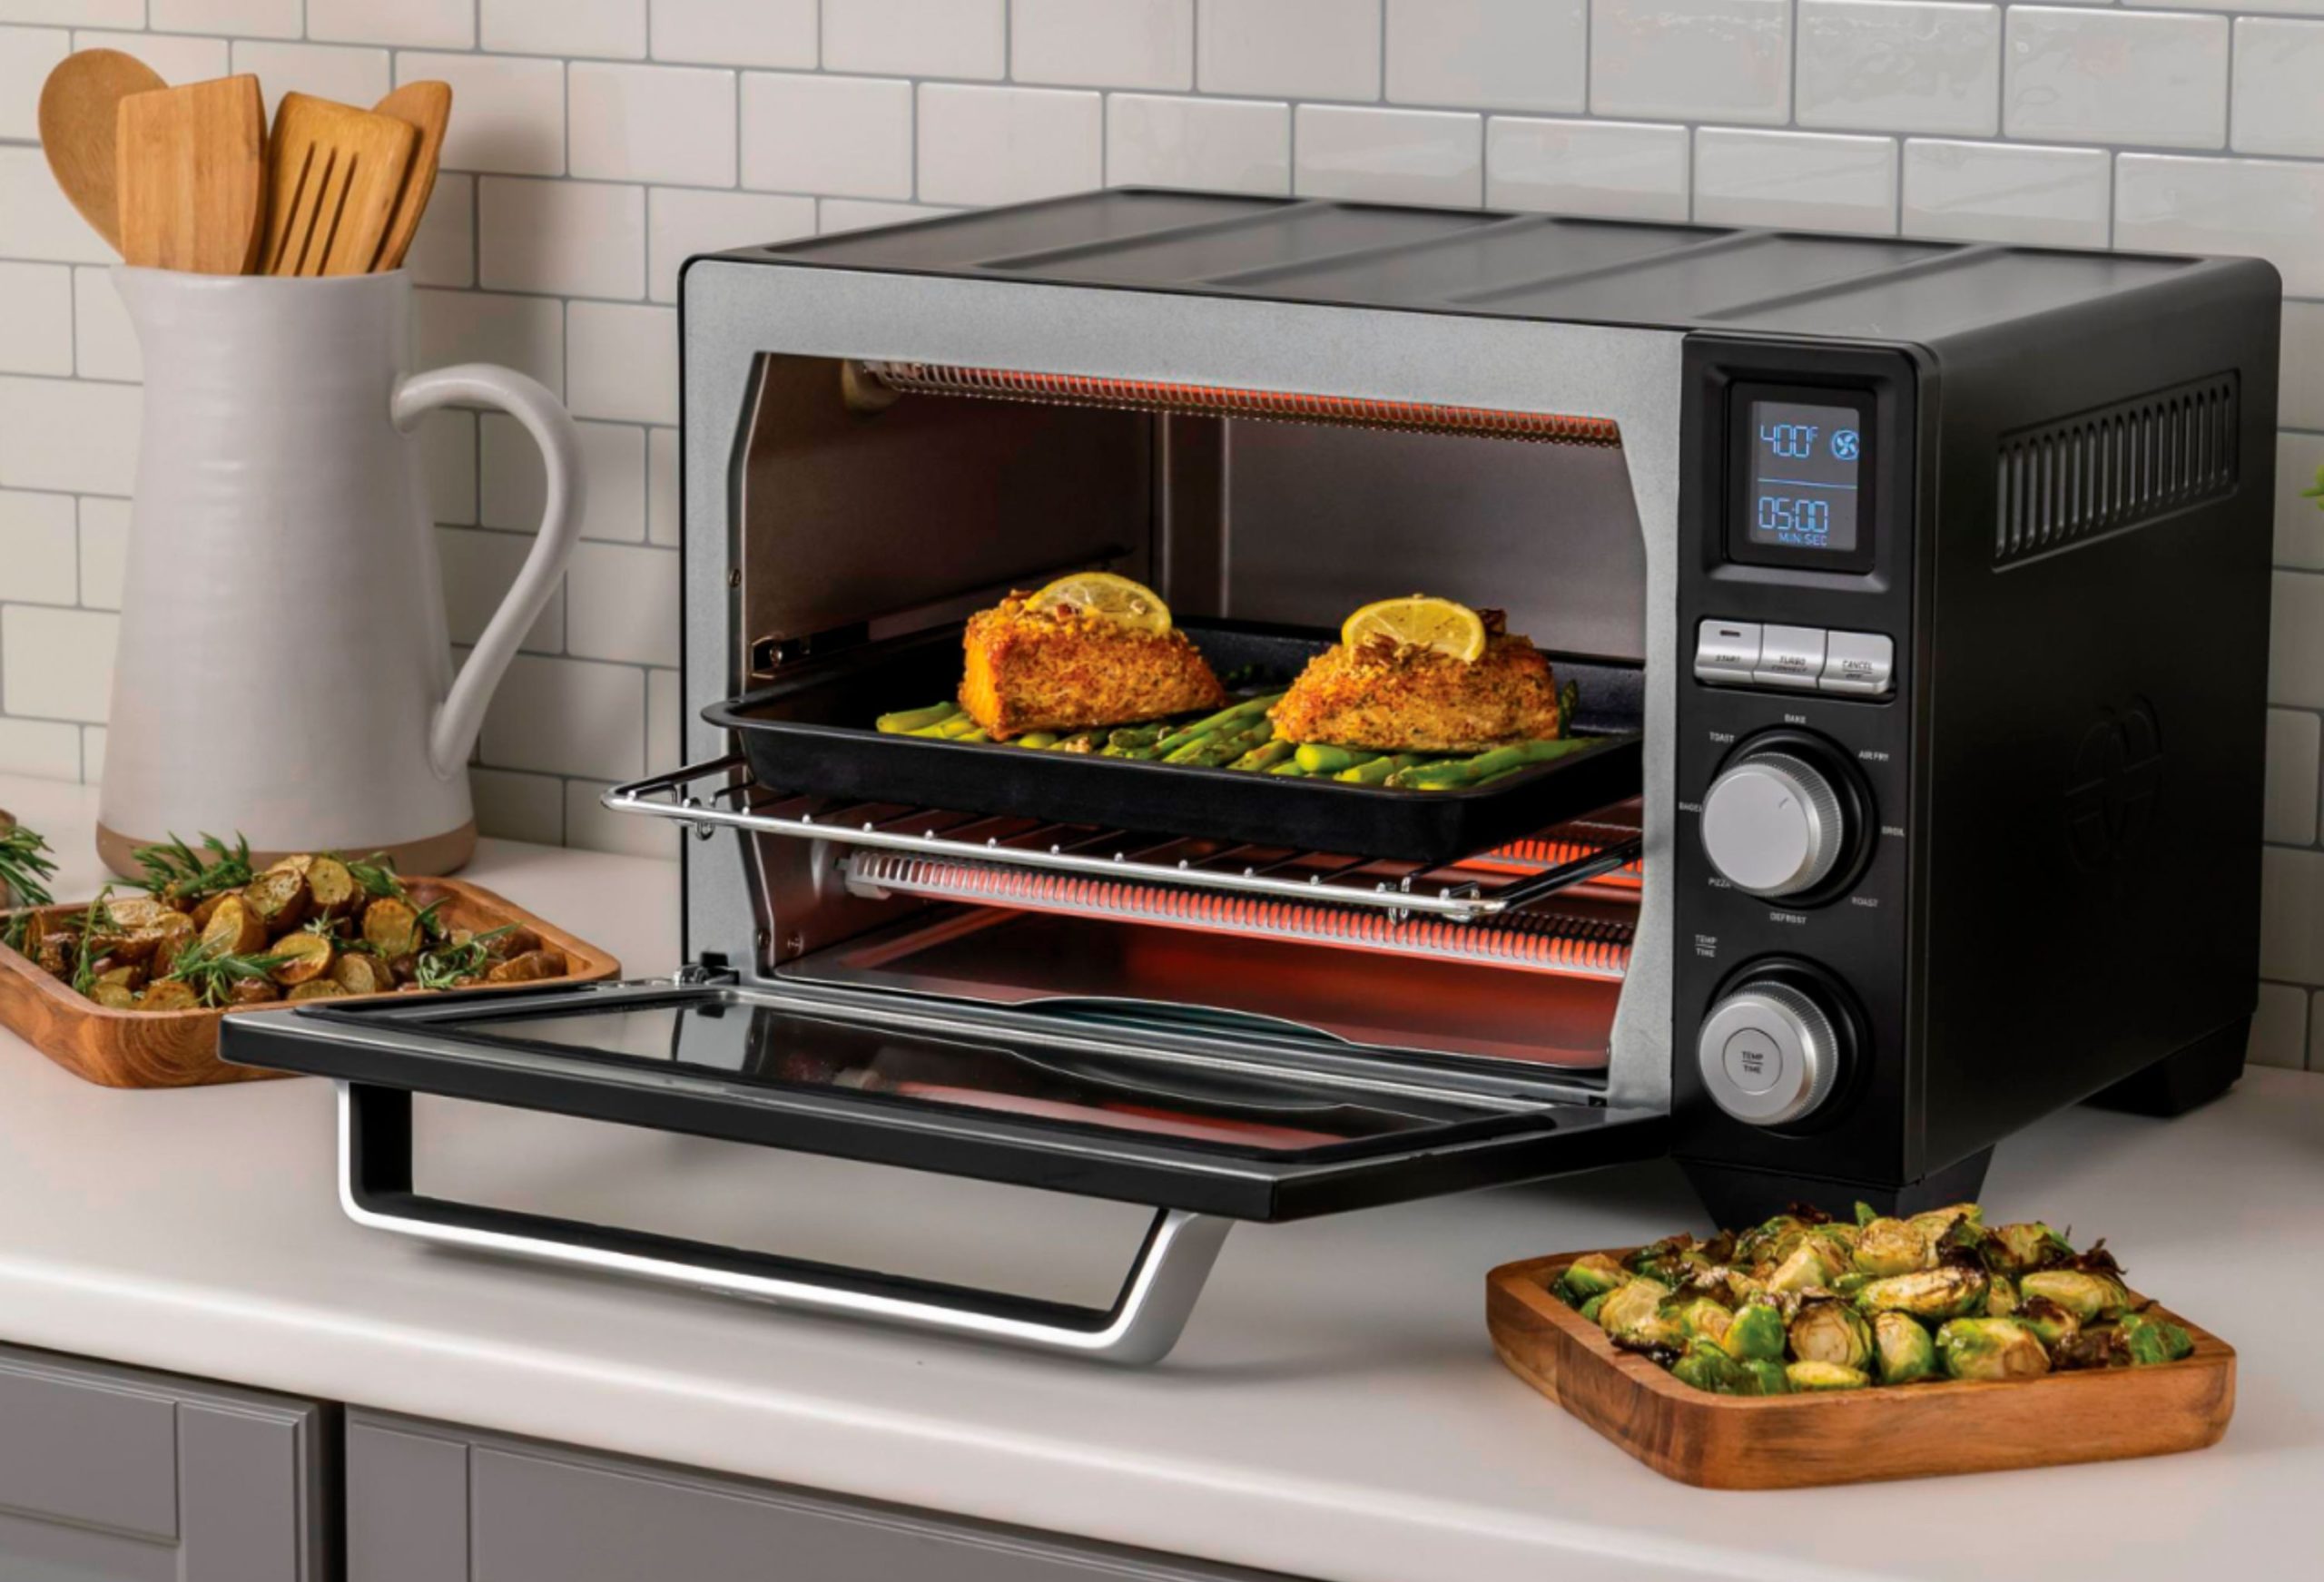 Calphalon Performance Dual Oven with Air Fry Review, Nice